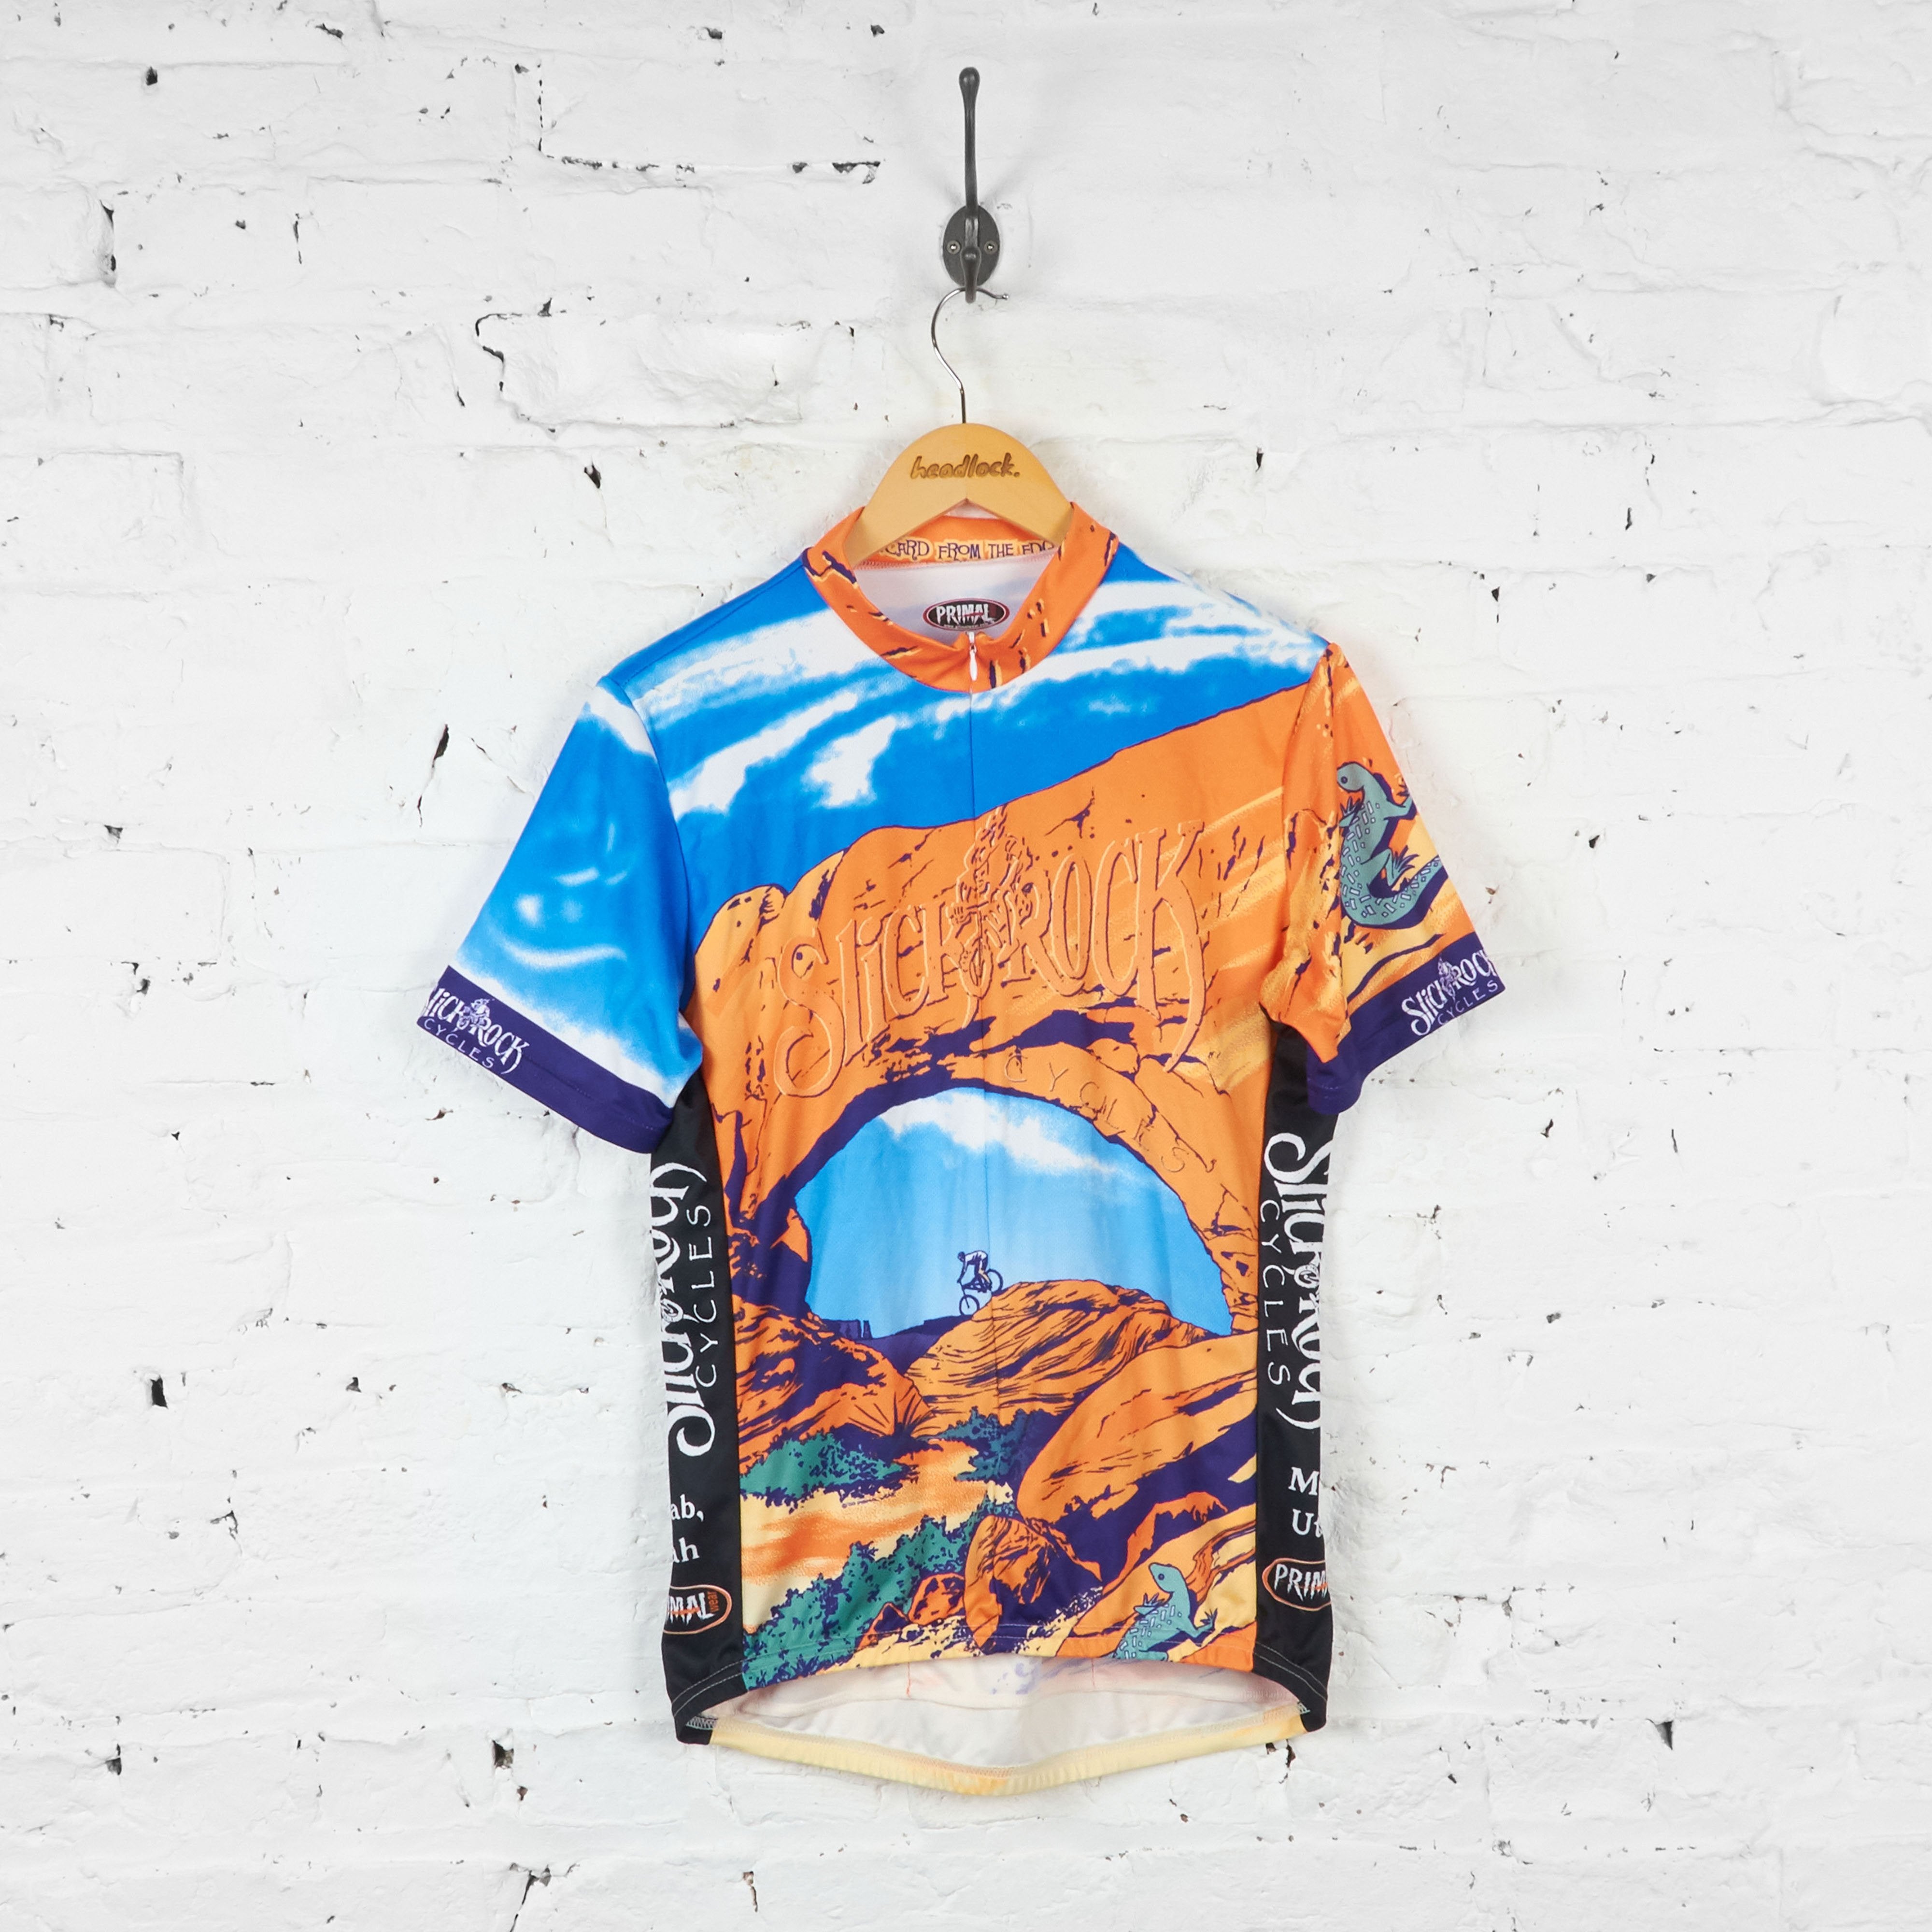 Primal Wear, Shirts & Tops, Cycling Jersey From Primal Wear